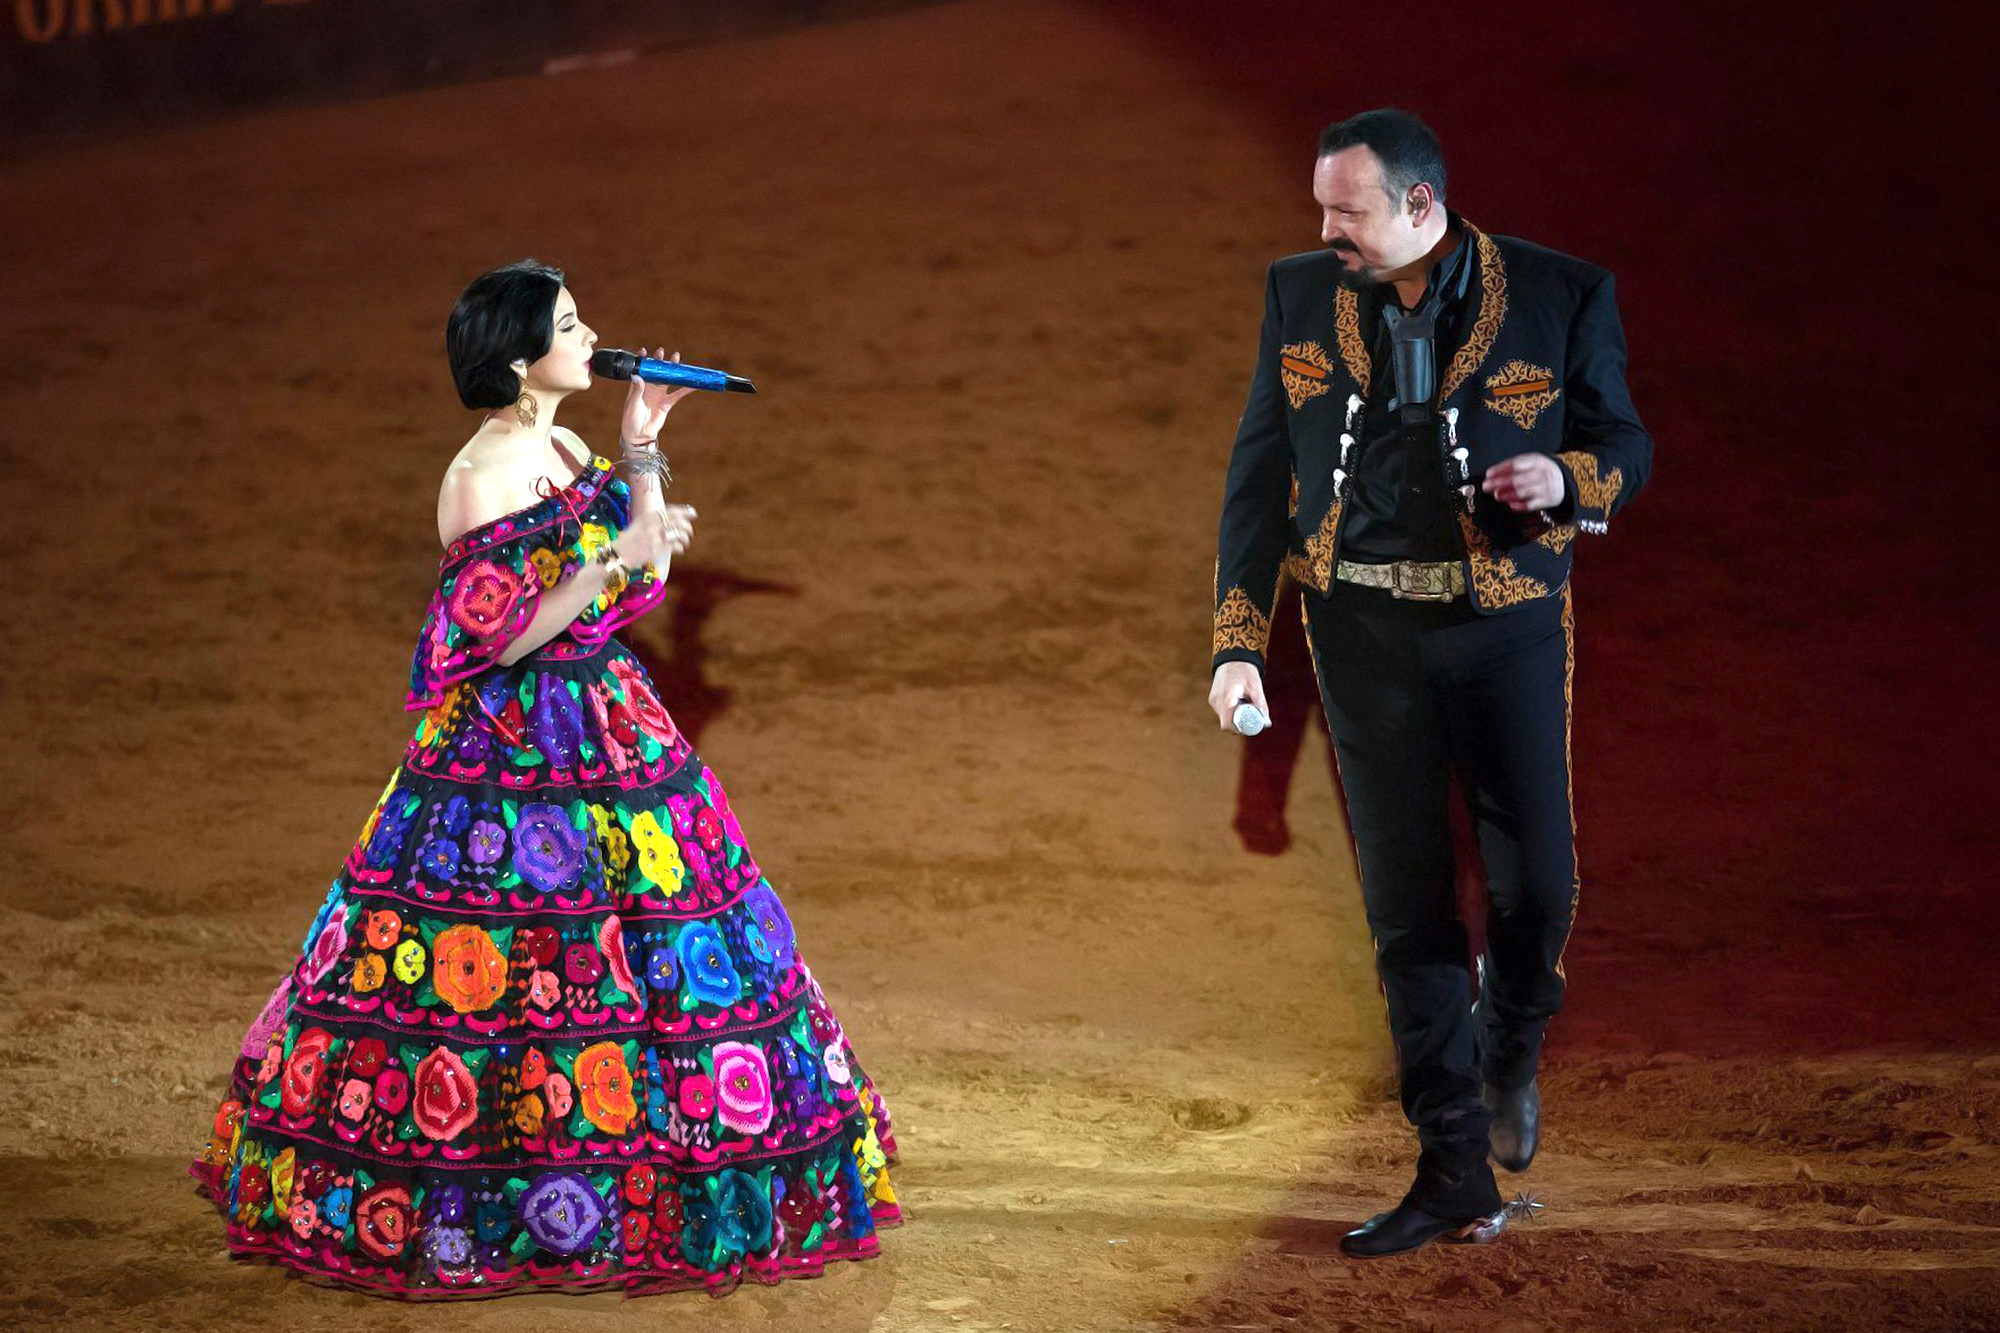 angela-aguilar-reunites-with-pepe-aguilar-in-concert-after-confirming-romance-with-christian-nodal